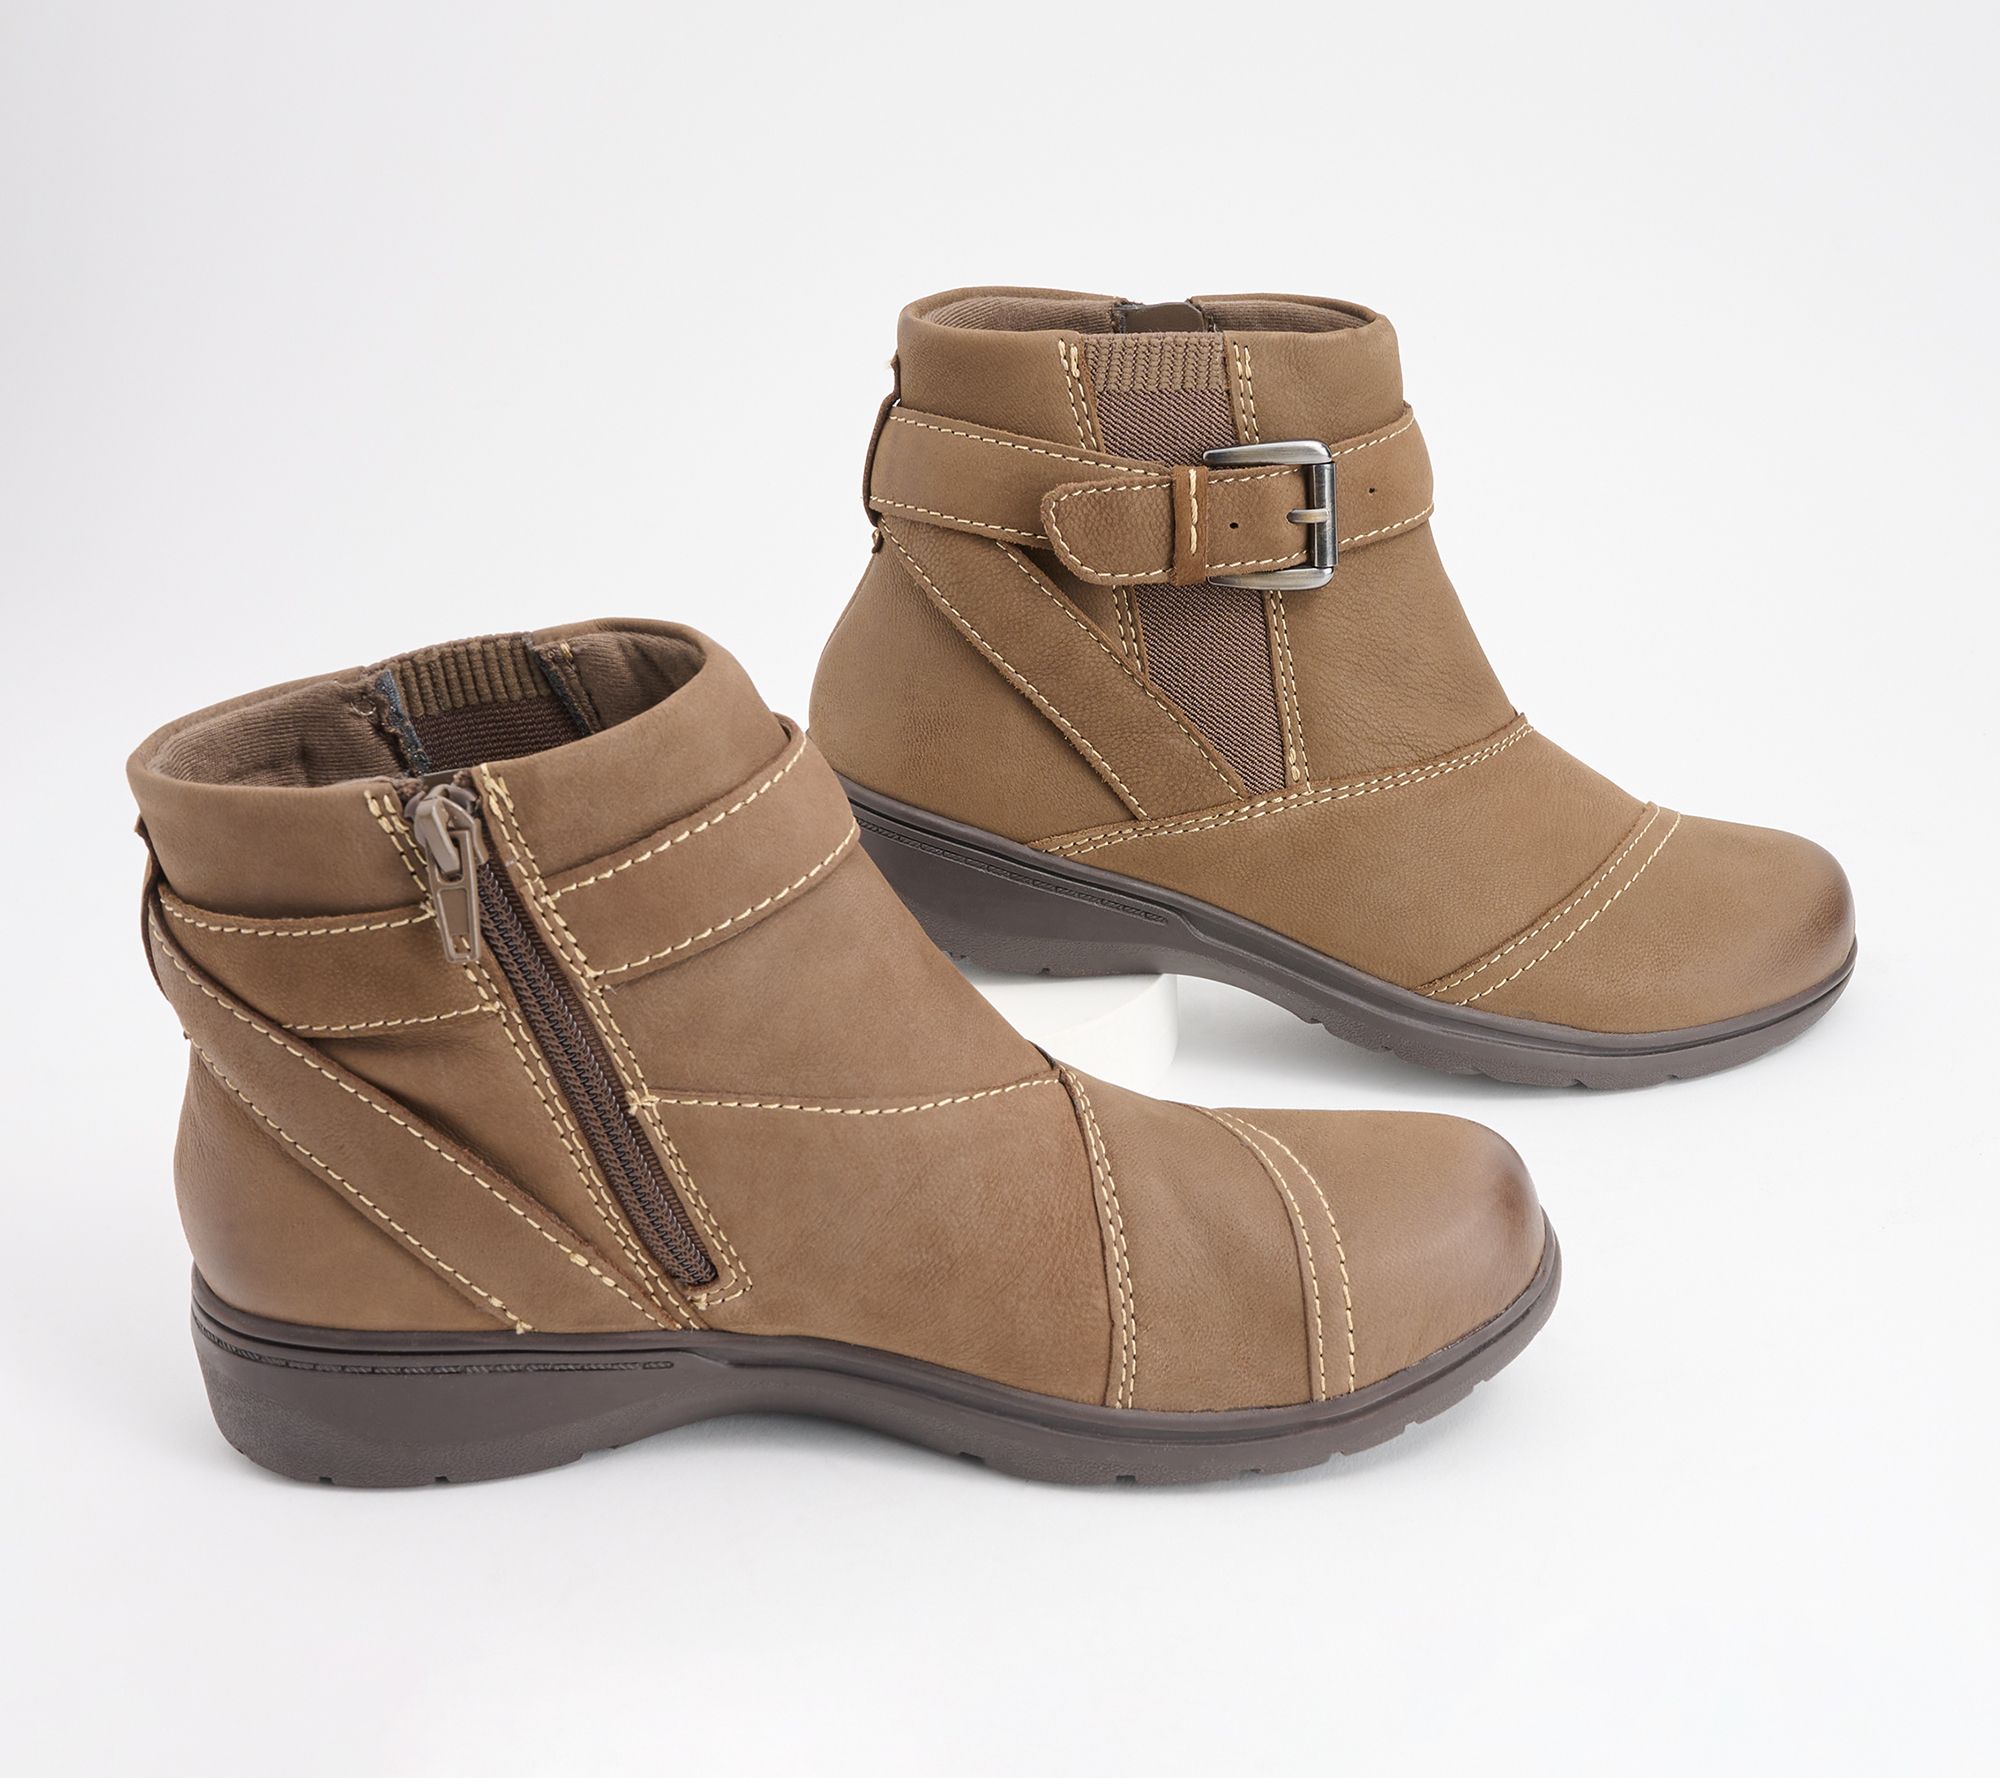 Clarks Collection Leather Ankle Boot - Carleigh Dalia - QVC.com